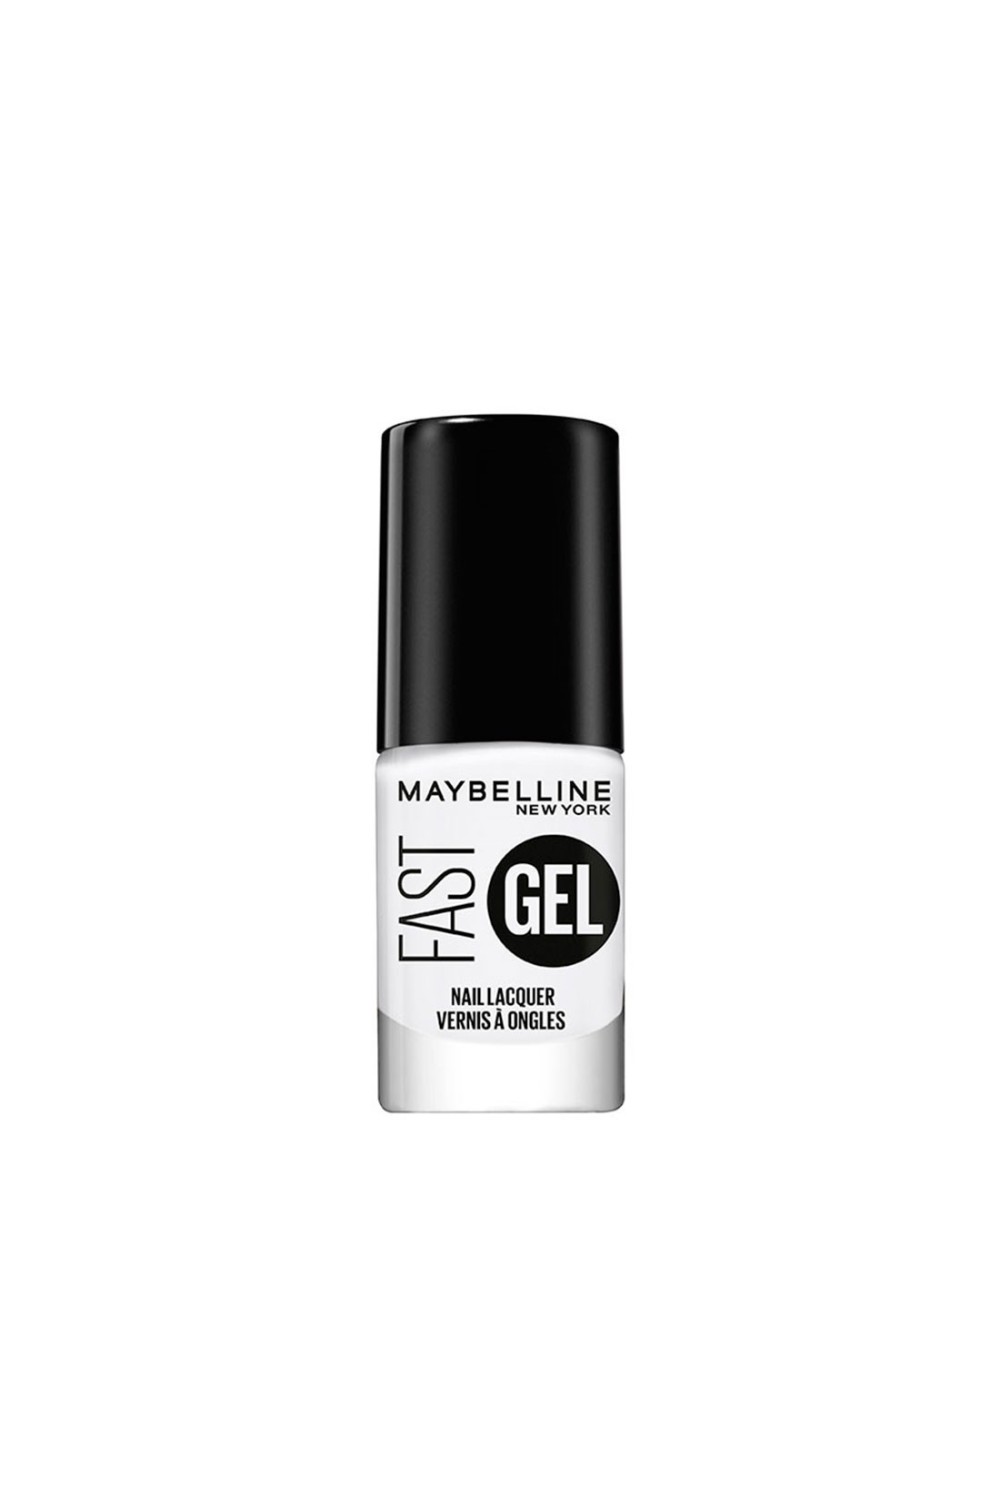 Maybelline Fast Gel Nail Lacquer 18-Tease 7ml